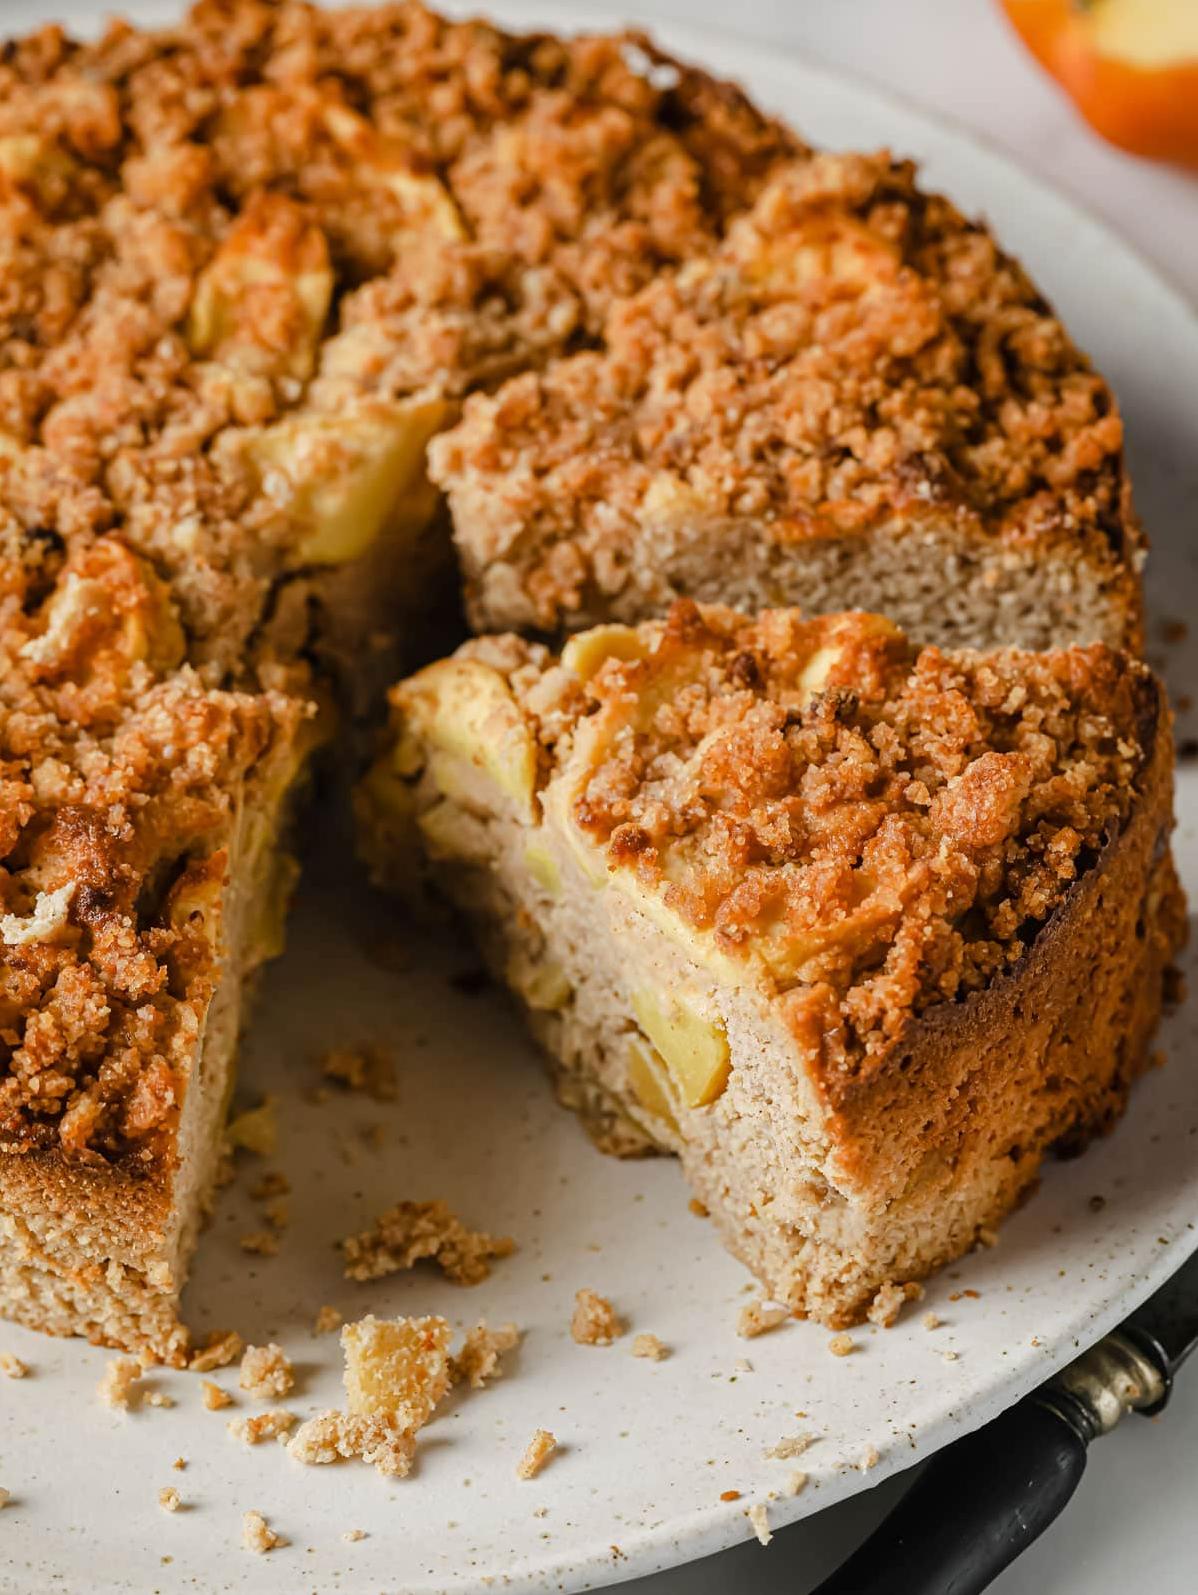  Trust me, one slice of this perfectly moist and fluffy coffee cake is never enough.